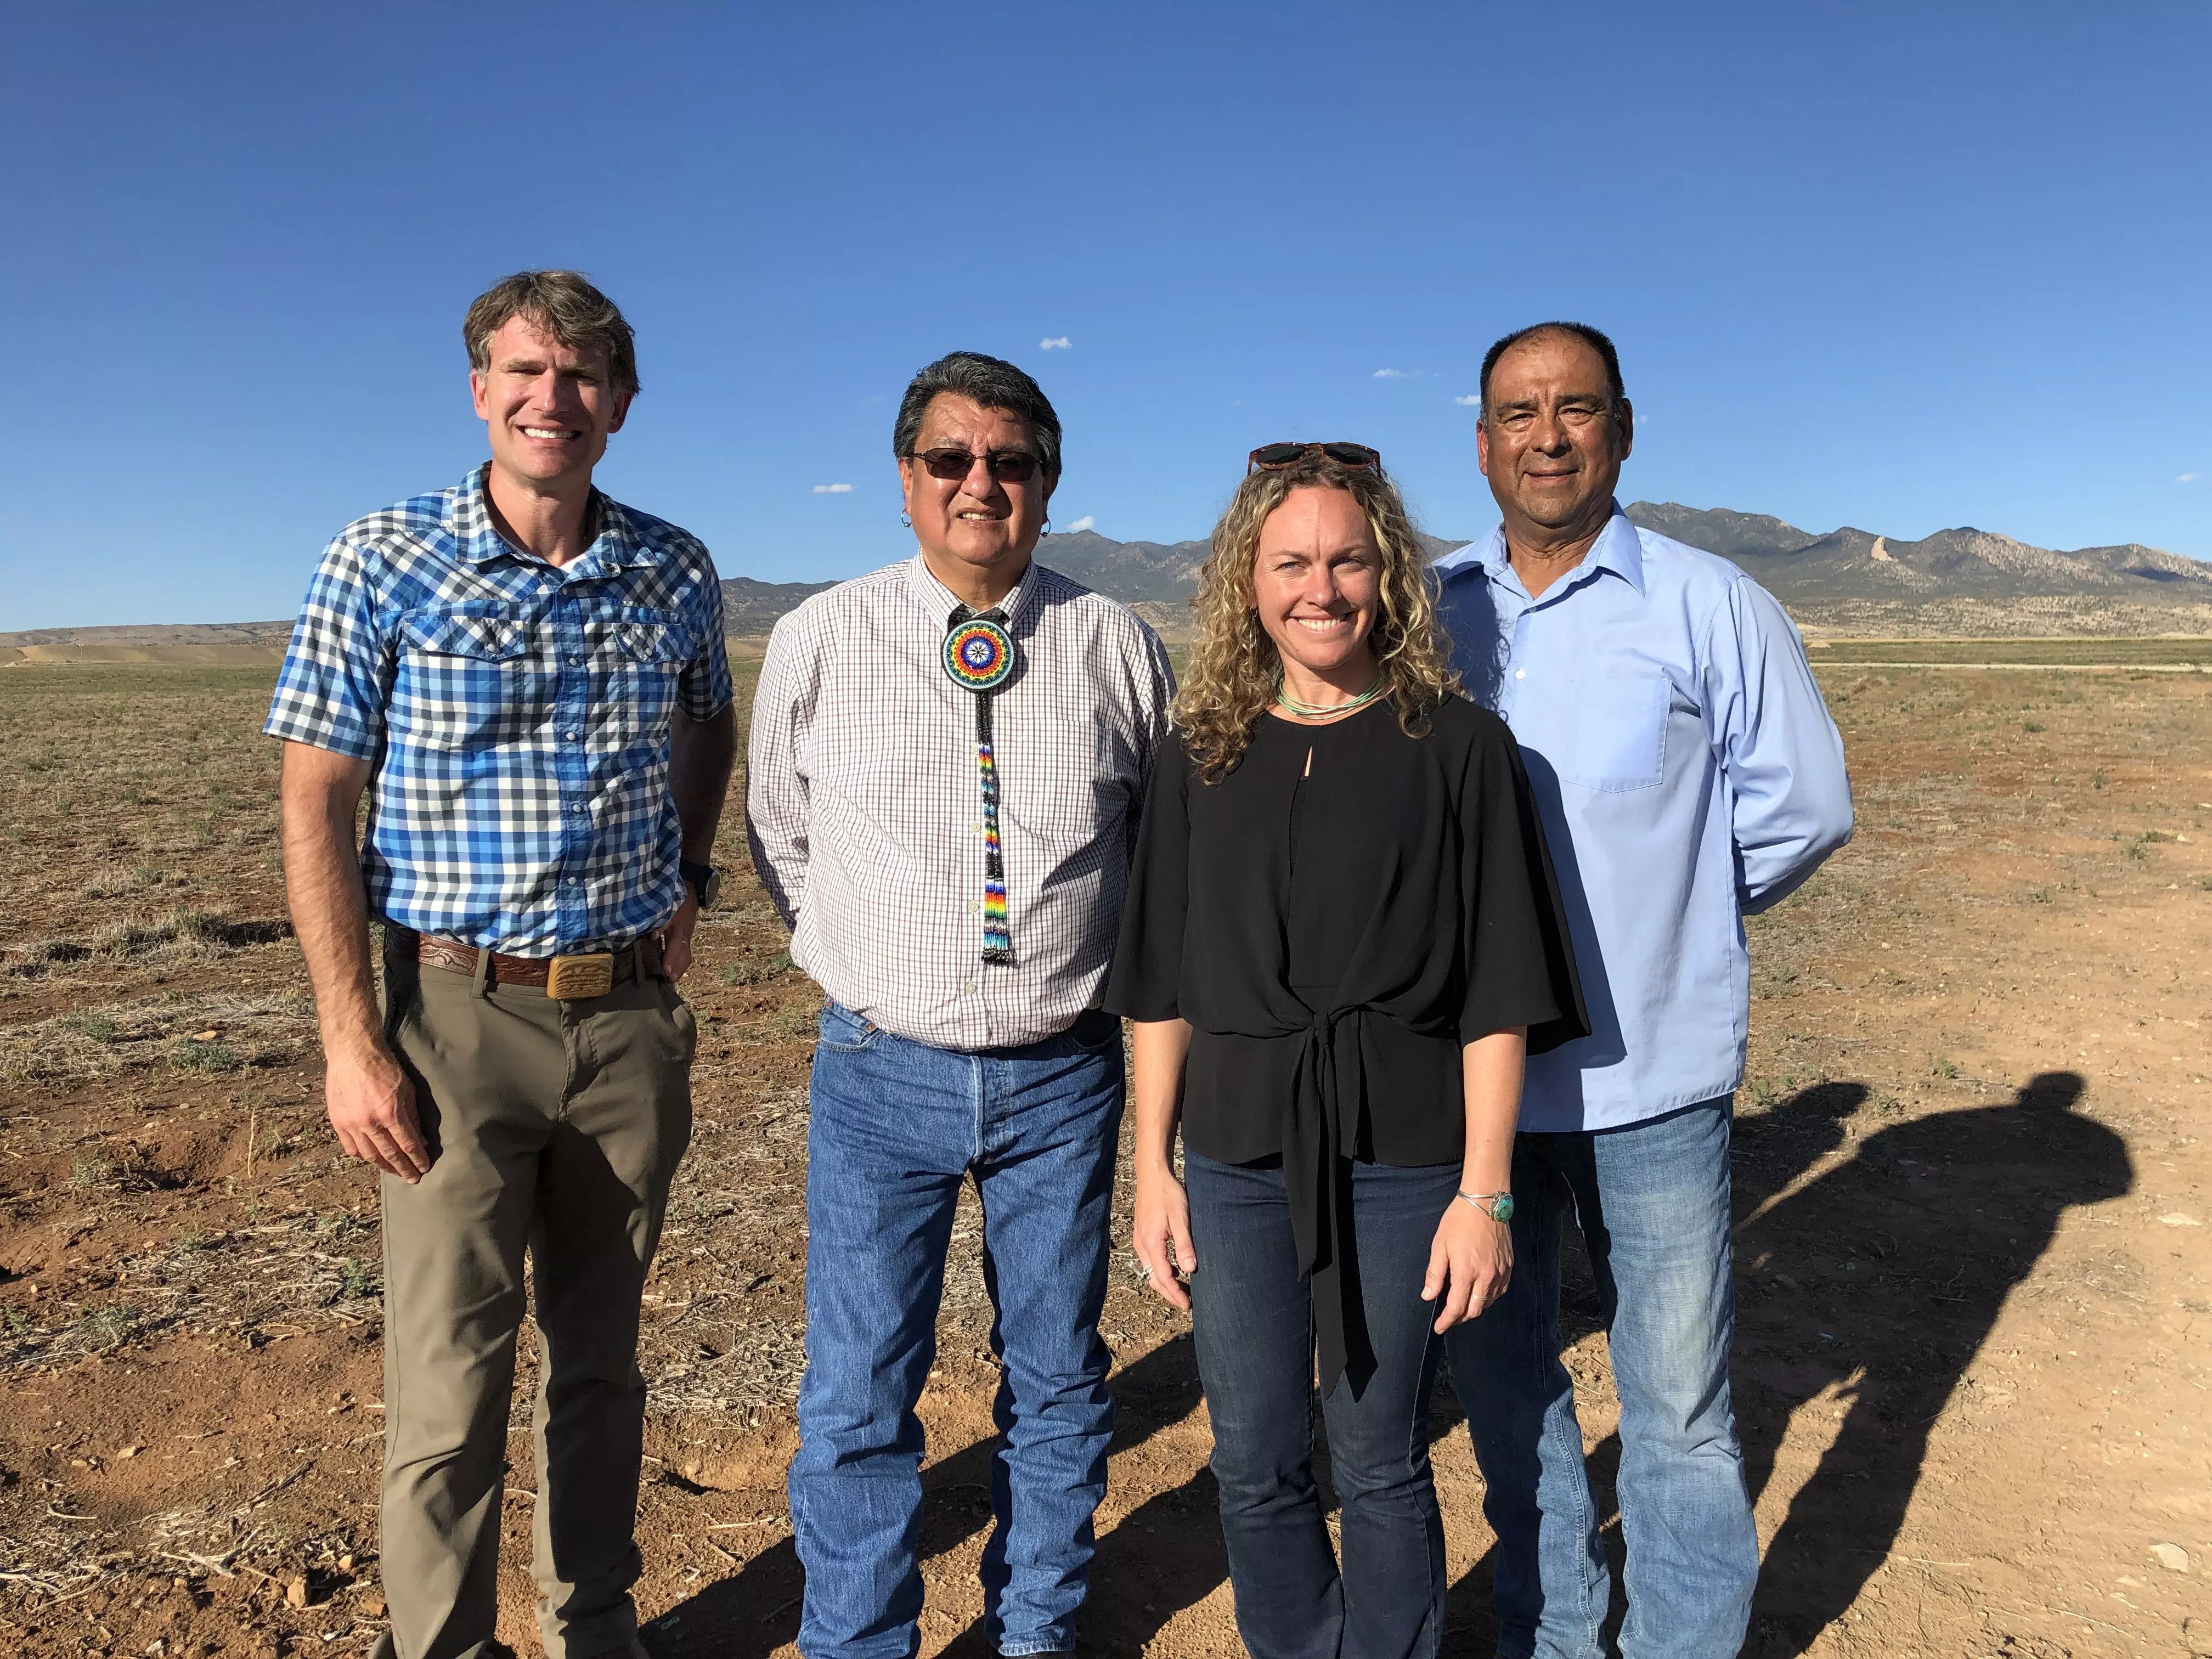 l-r: Dan Gibbs, Manuel Heart, Kate Greenberg, and Simon Martinez pose in a field for the camera.